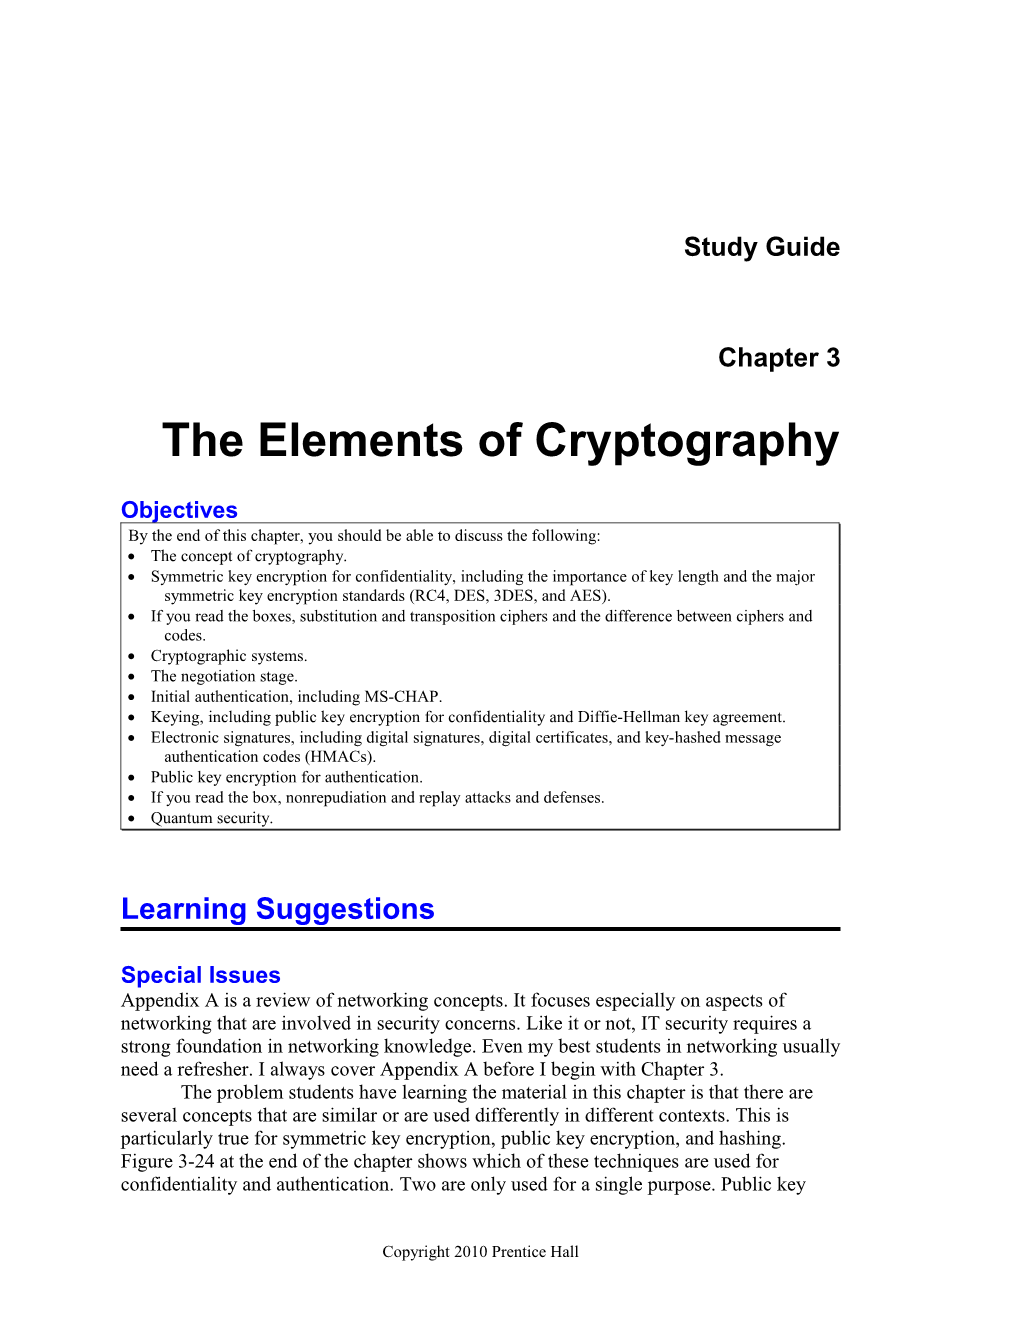 Chapter 3: the Elements of Cryptography